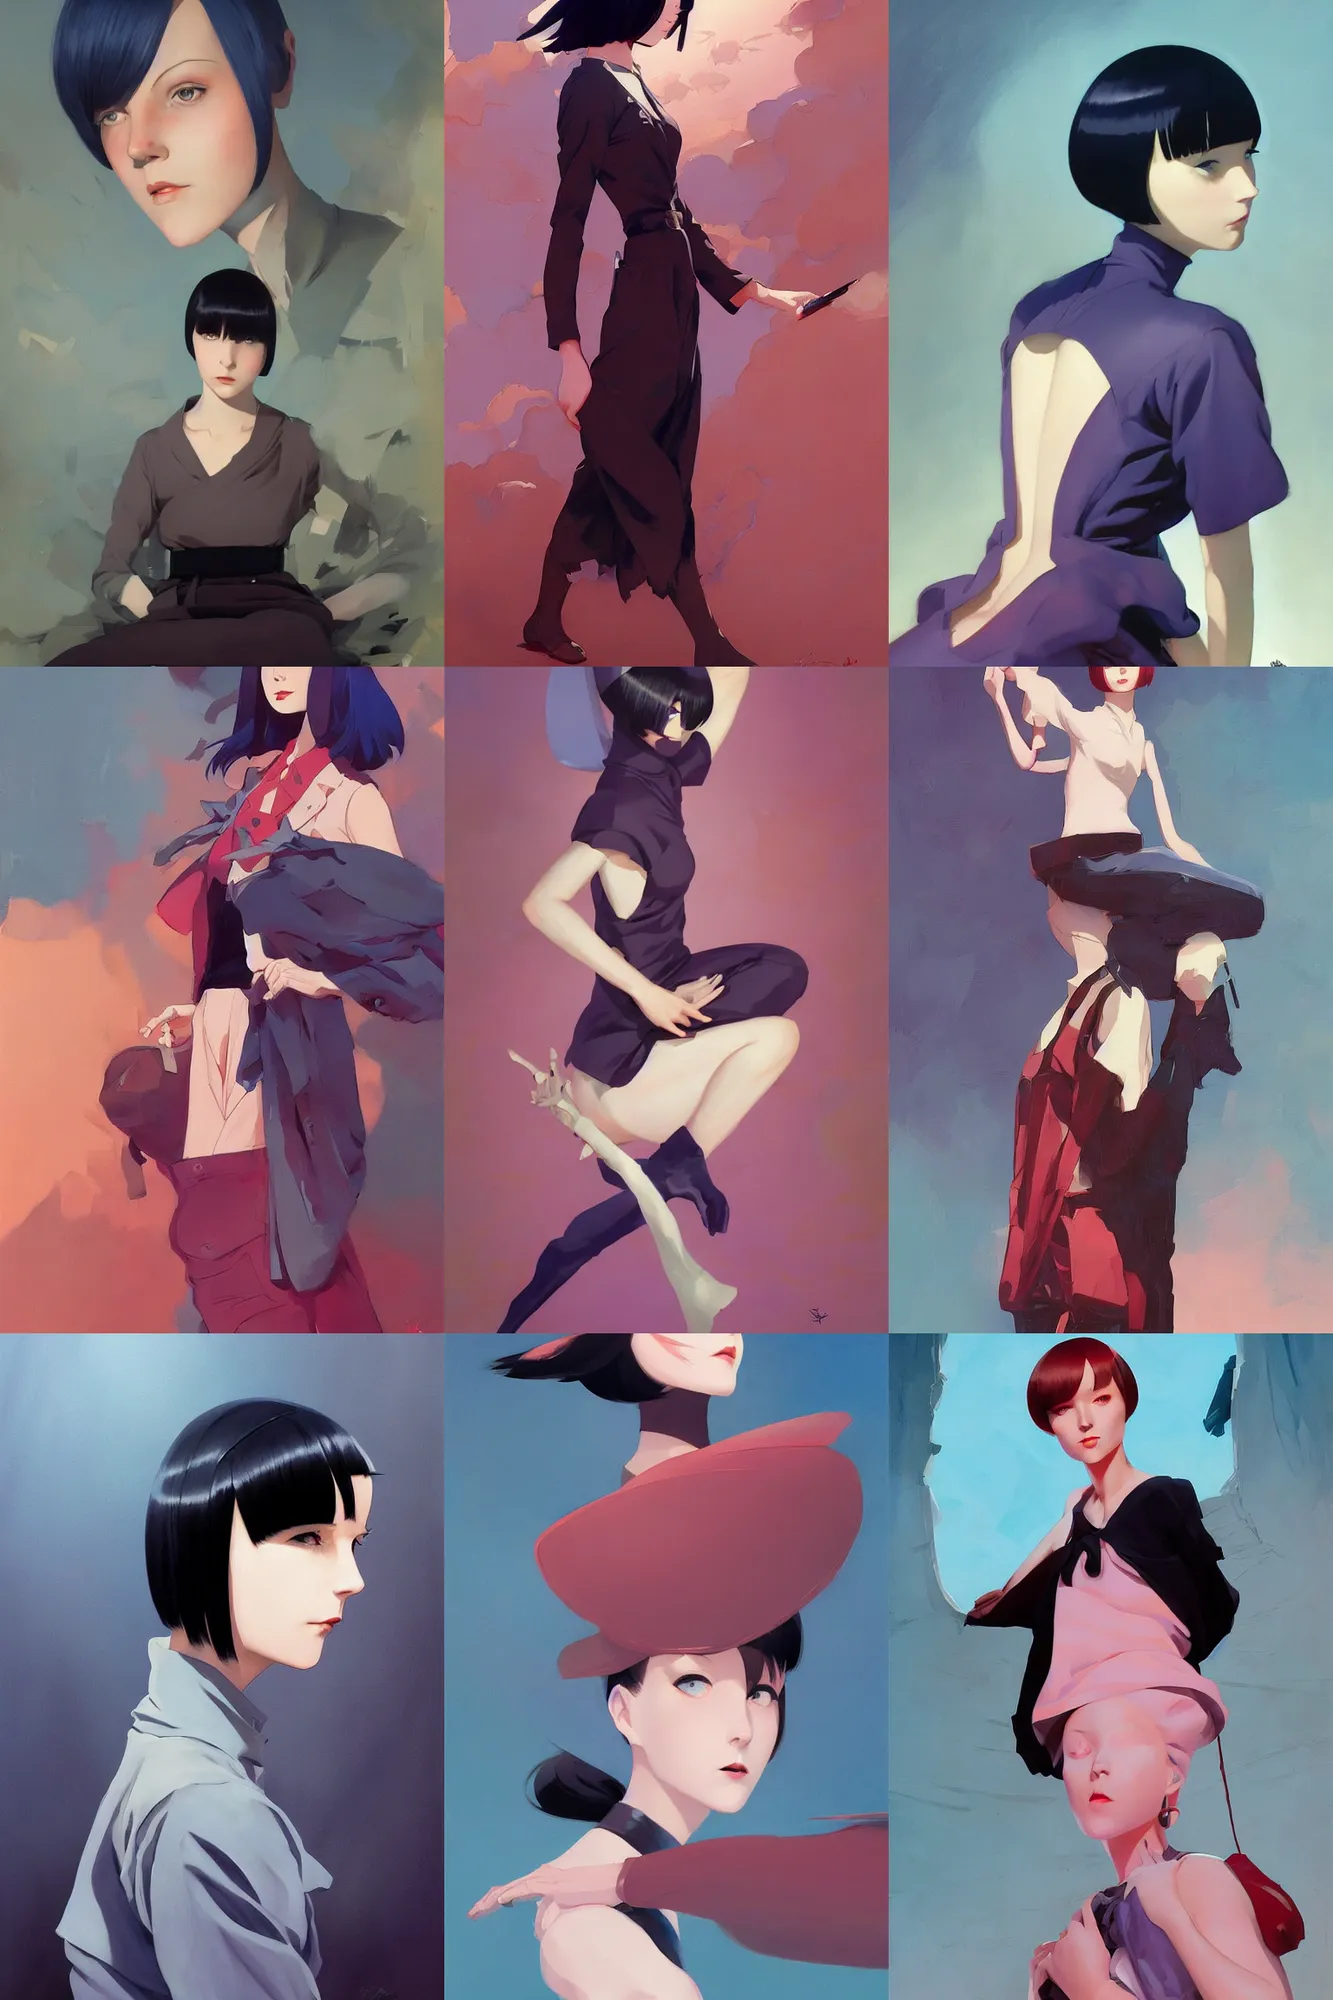 Prompt: mary louise brooks, official fanart behance hd artstation by jesper ejsing, by rhads, makoto shinkai and lois van baarle, ilya kuvshinov, ossdraws, and by feng zhu and loish and laurie greasley, victo ngai, andreas rocha, john harris